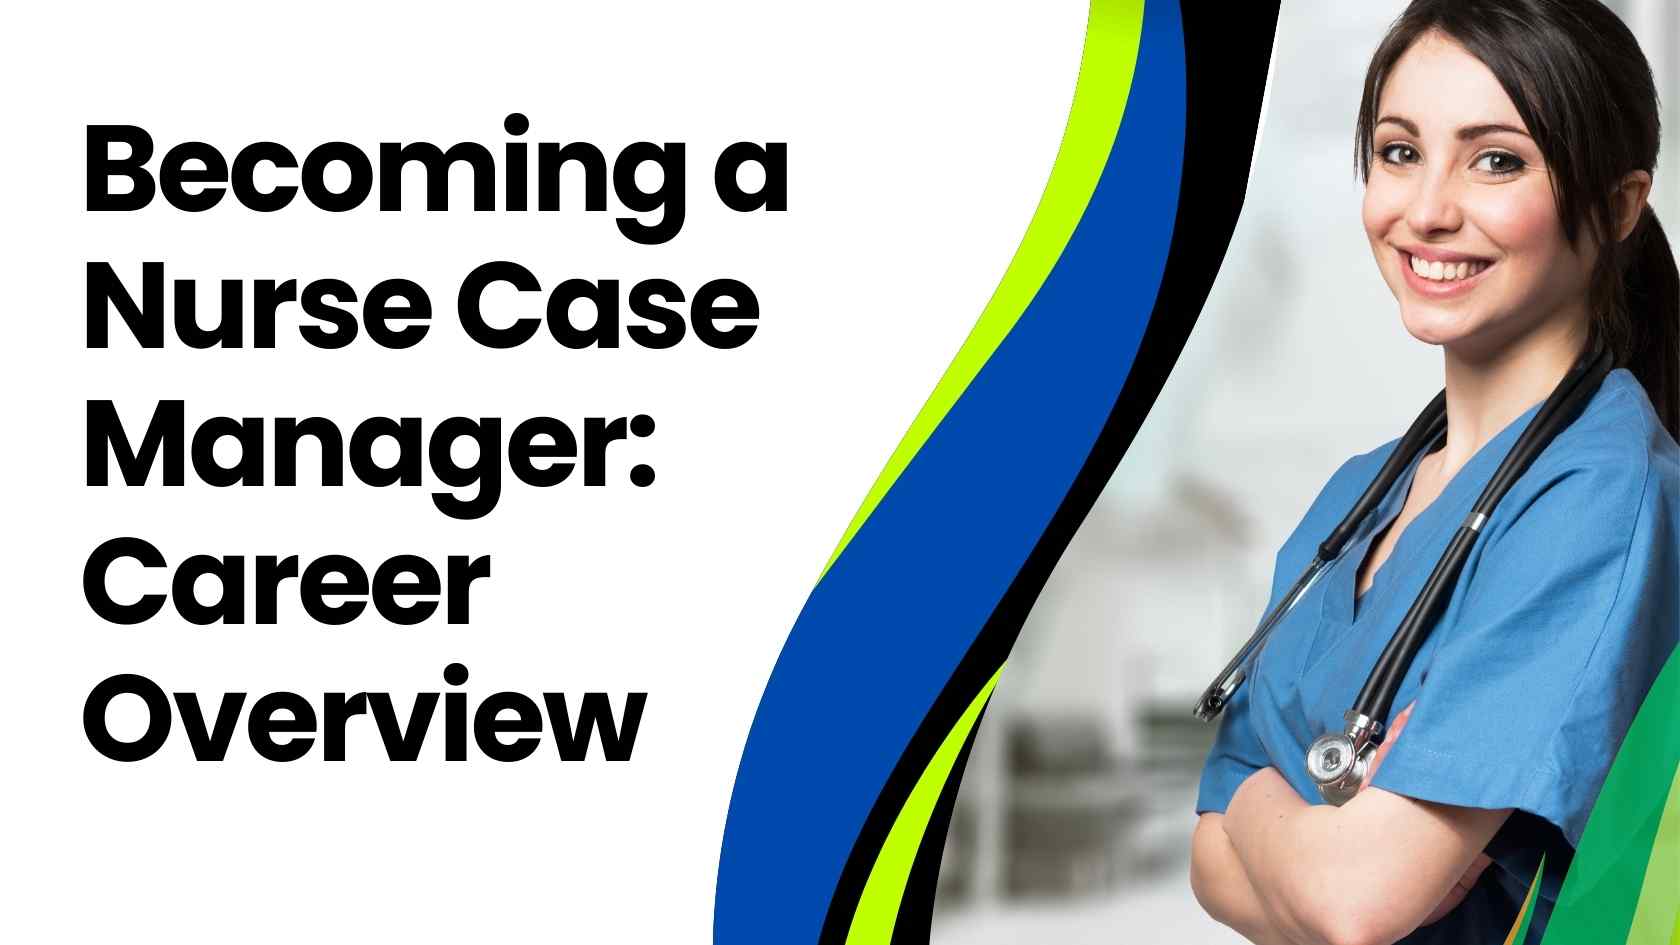 Becoming a Nurse Case Manager: Career Overview